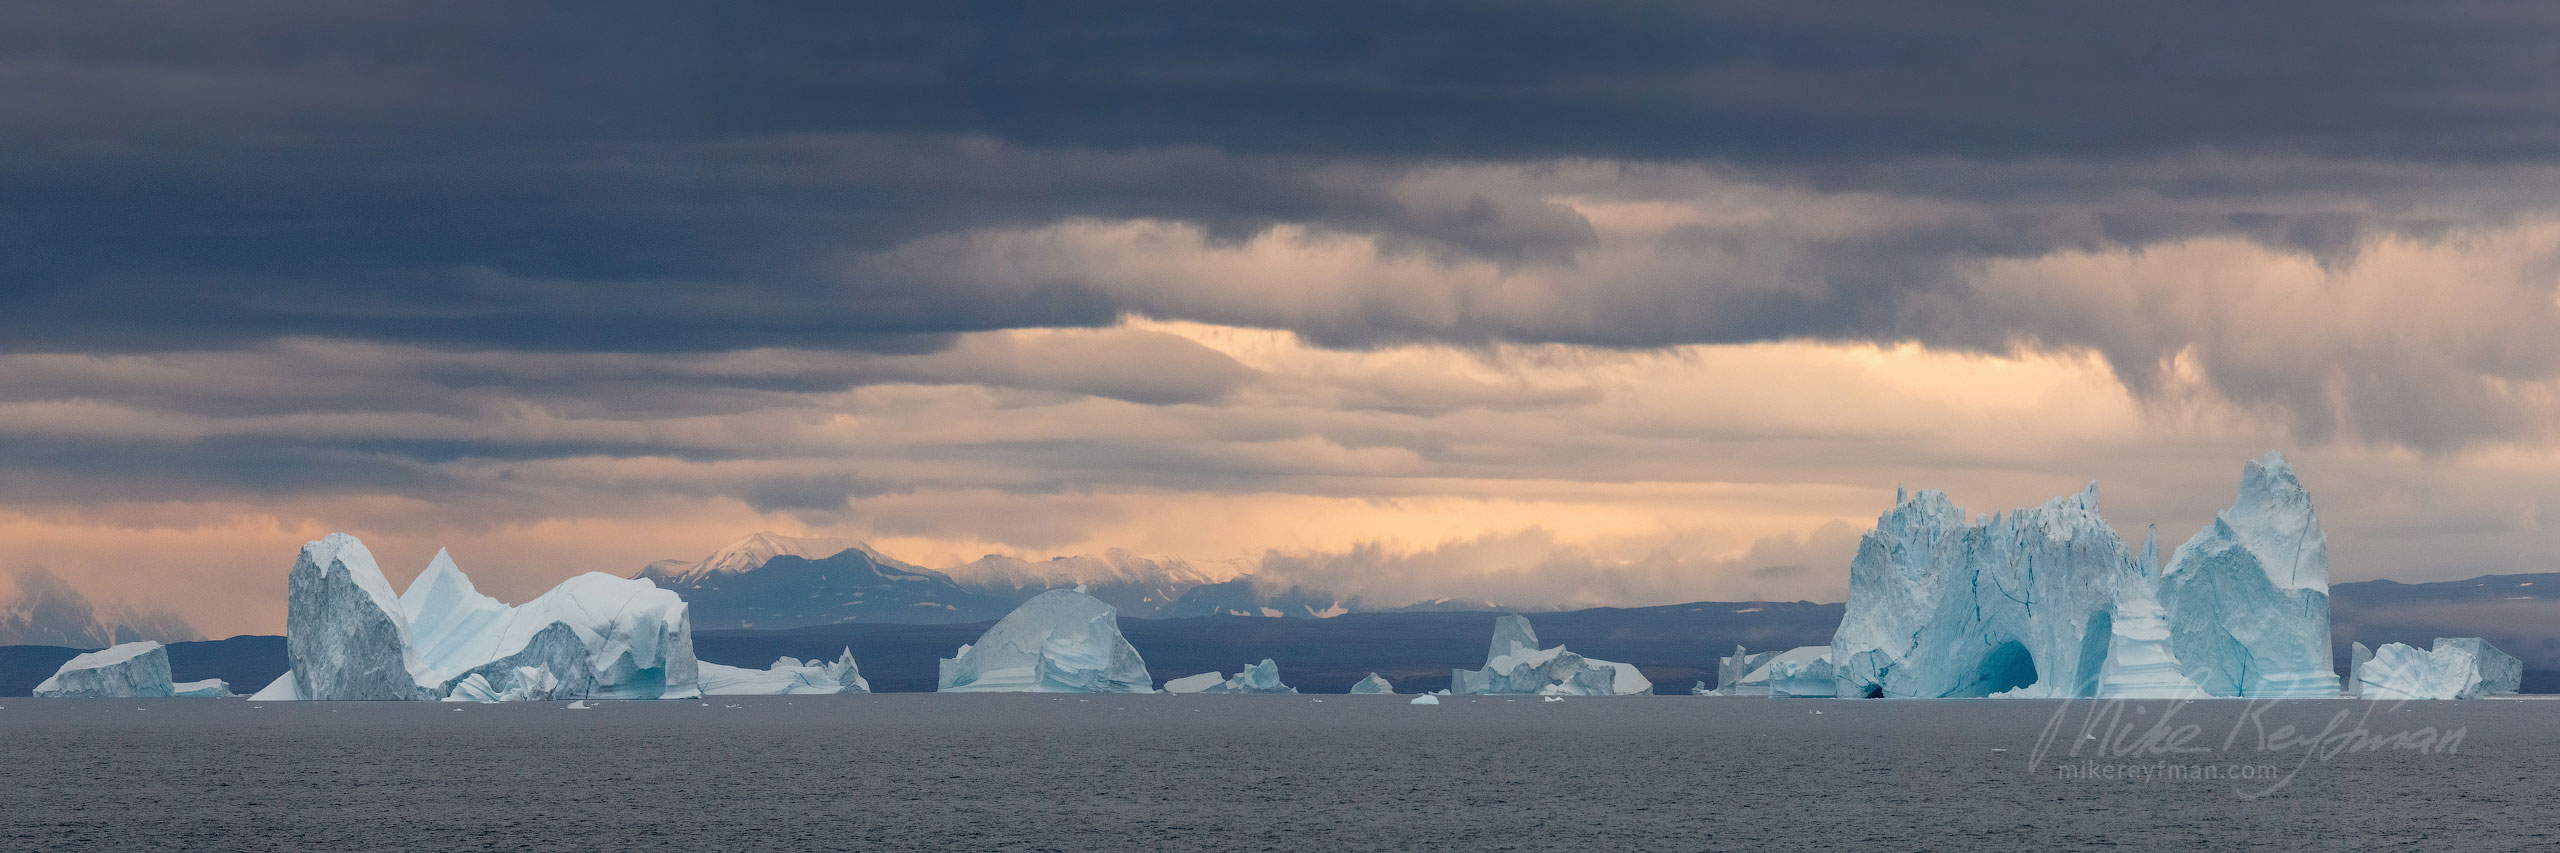 Icebergs in Scoresby Sund. Greenland. 085-GR-SC_50B8779_Pano-1x3 - The Scoresby Sund fjord system and the settlement of Ittoqqortoormiit. East Greenland. - Mike Reyfman Photography